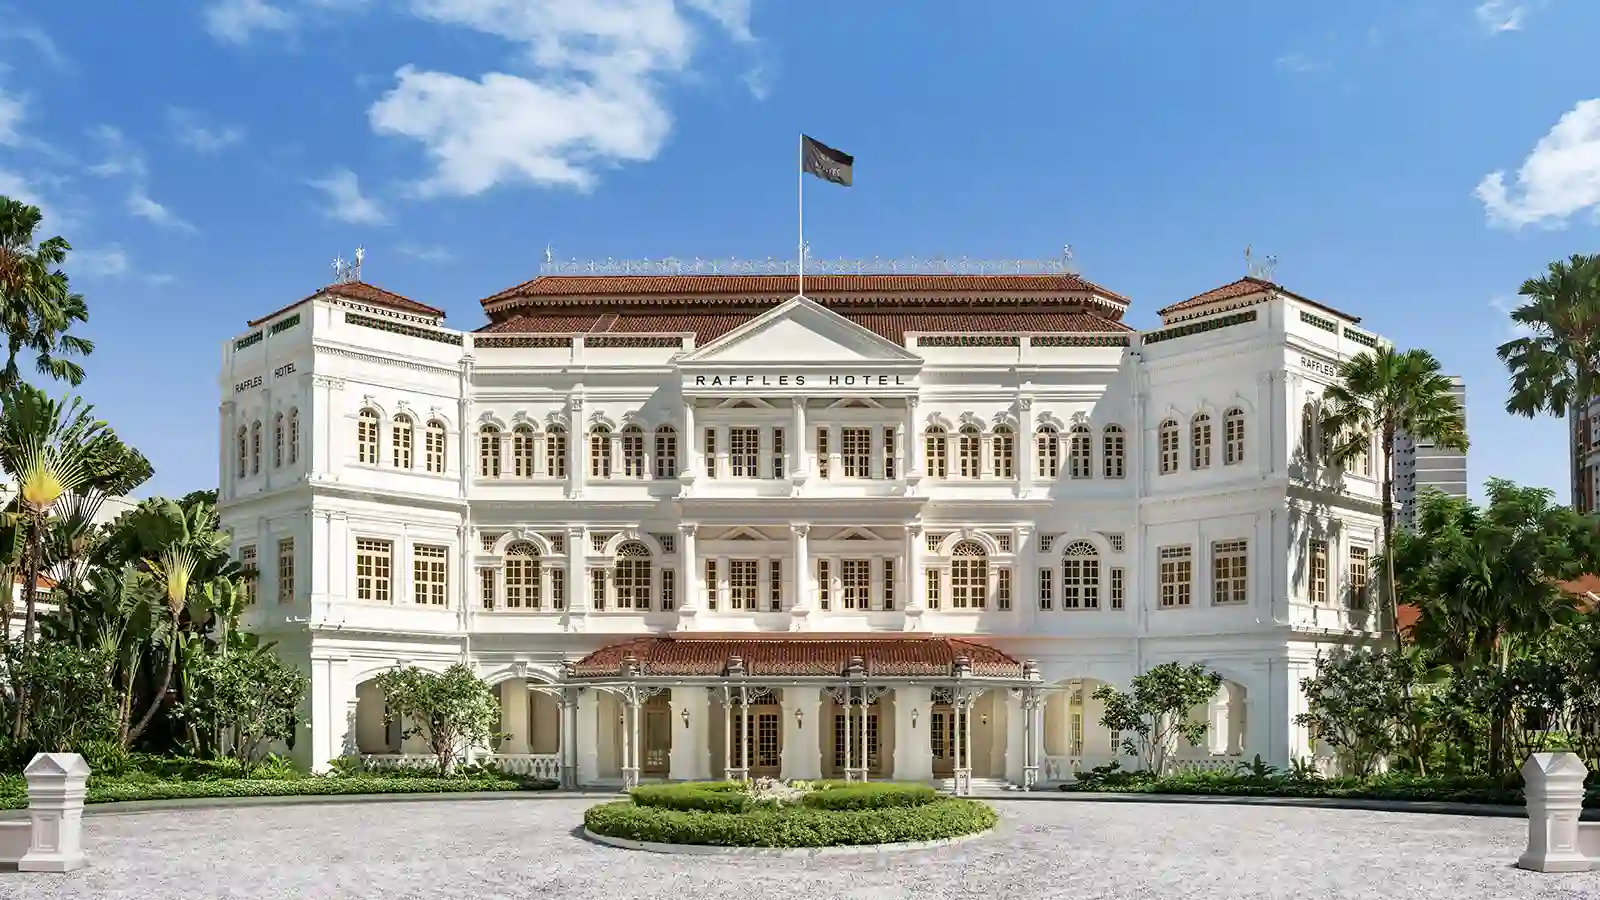 a large white building with a flag on top with Raffles Hotel in the background